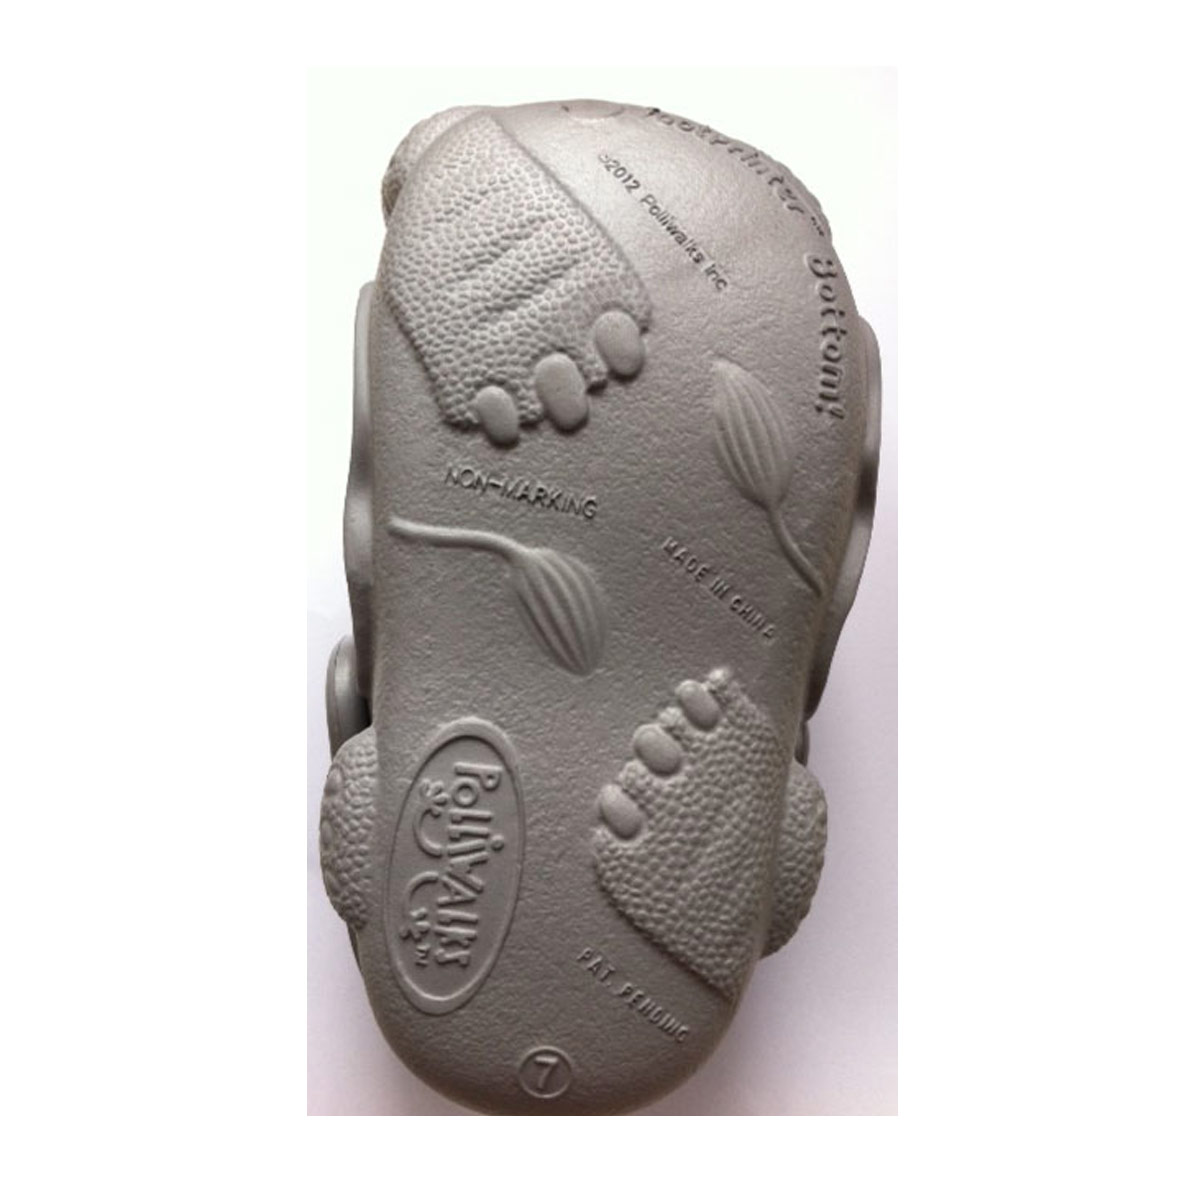 Polliwalks : Toddler shoes Ethan the ELEPHANT Gray # 12